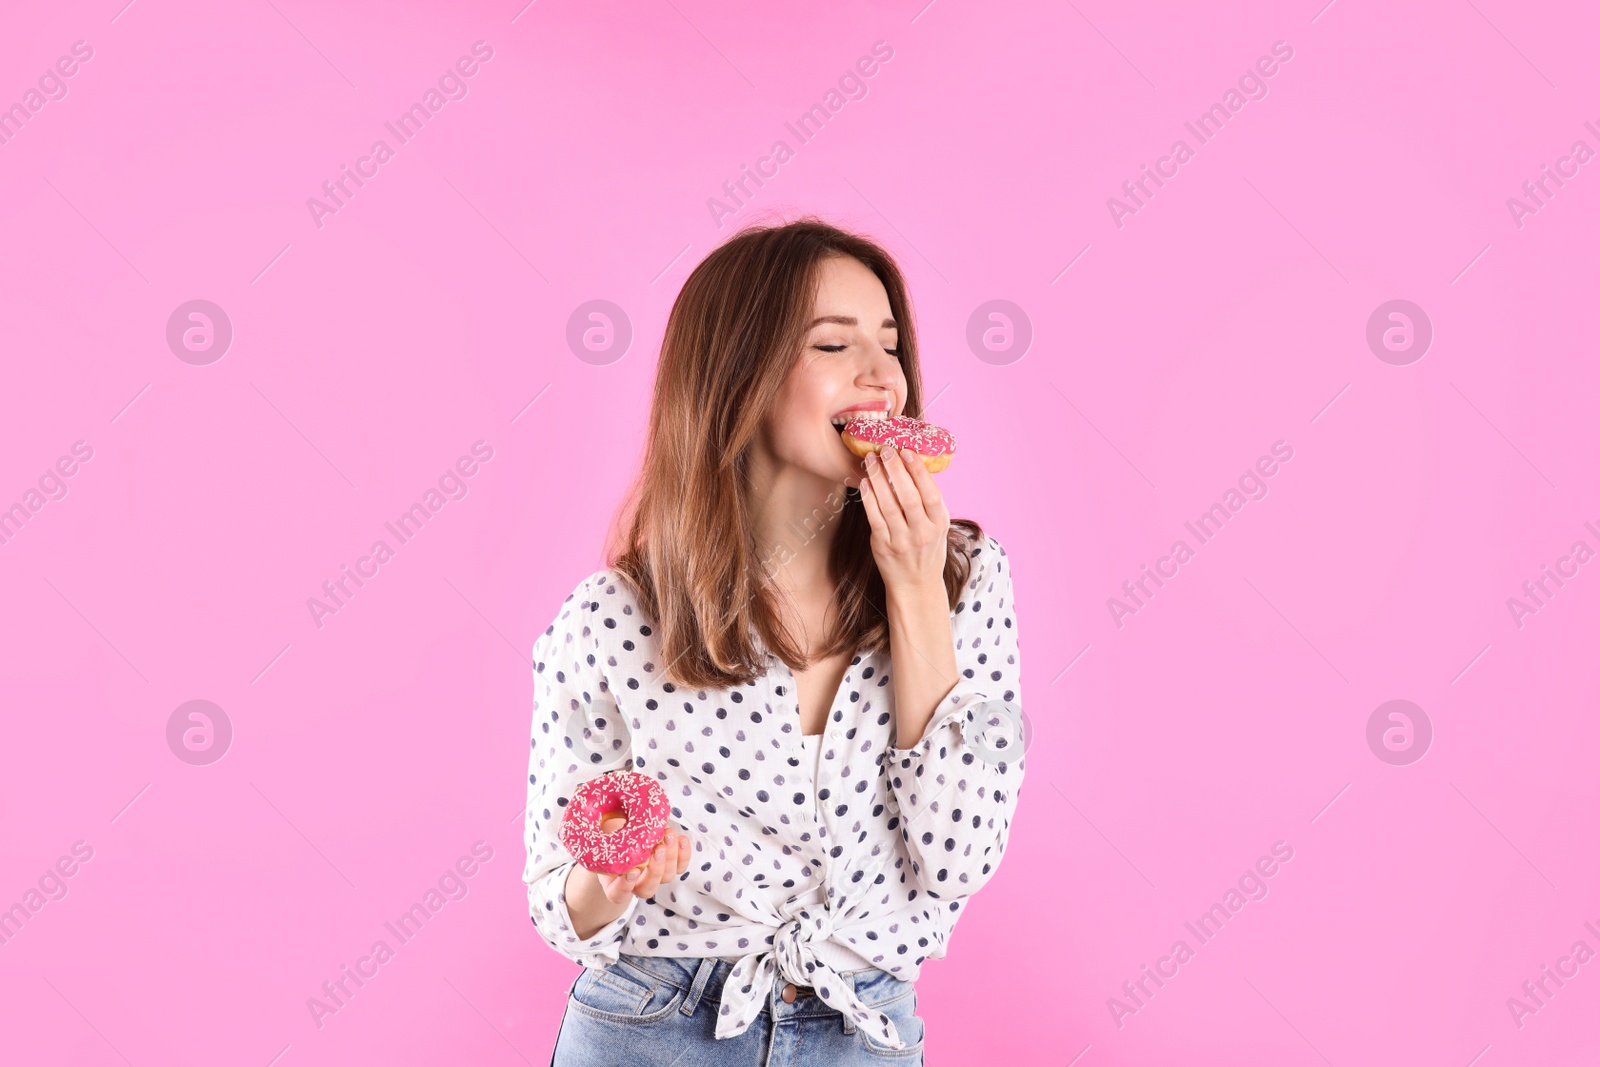 Photo of Beautiful young woman with donuts on light pink background